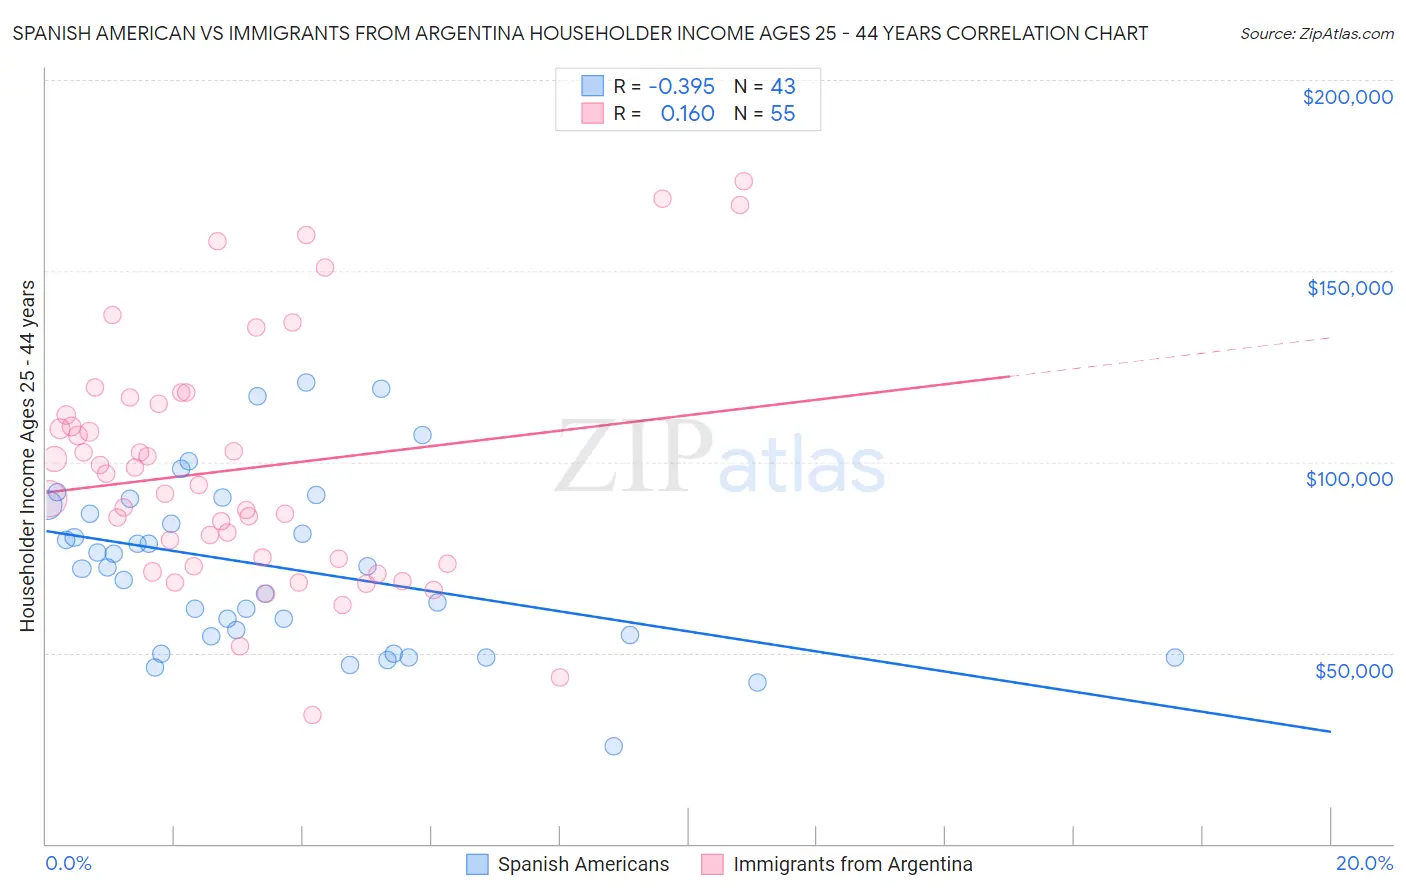 Spanish American vs Immigrants from Argentina Householder Income Ages 25 - 44 years